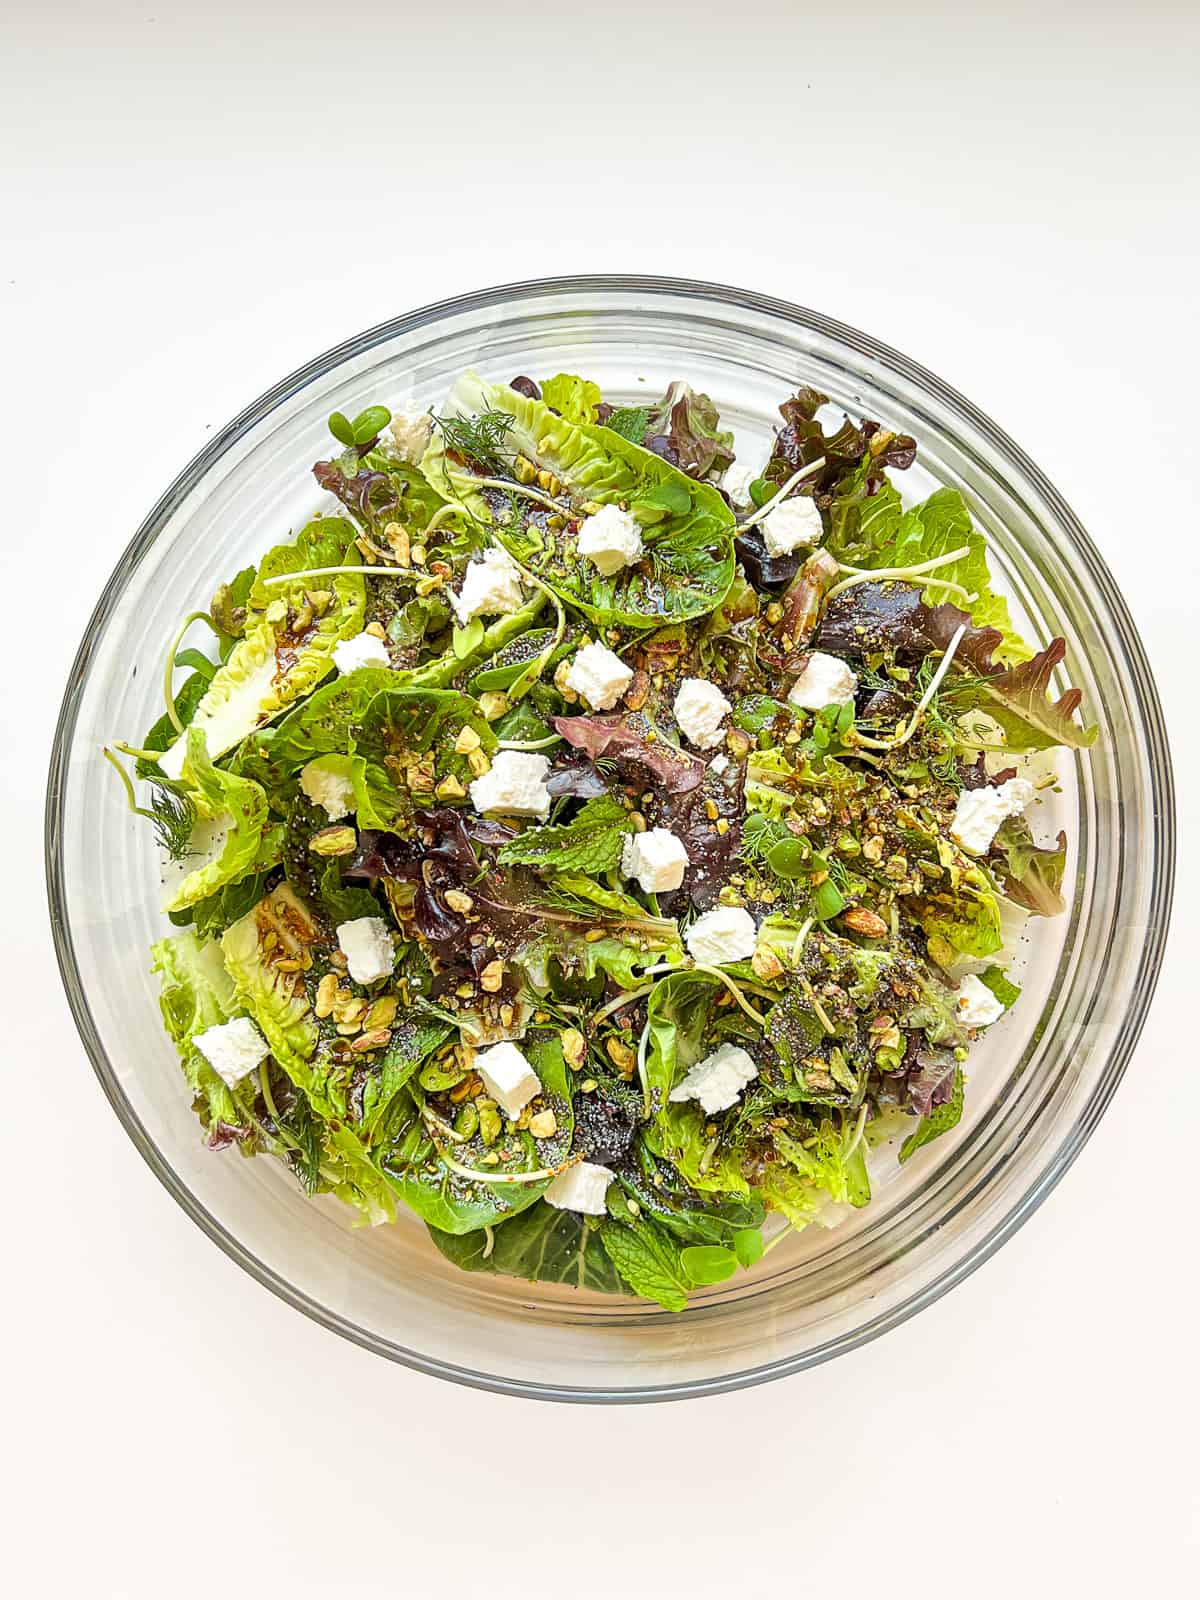 An image of the prepared salad.